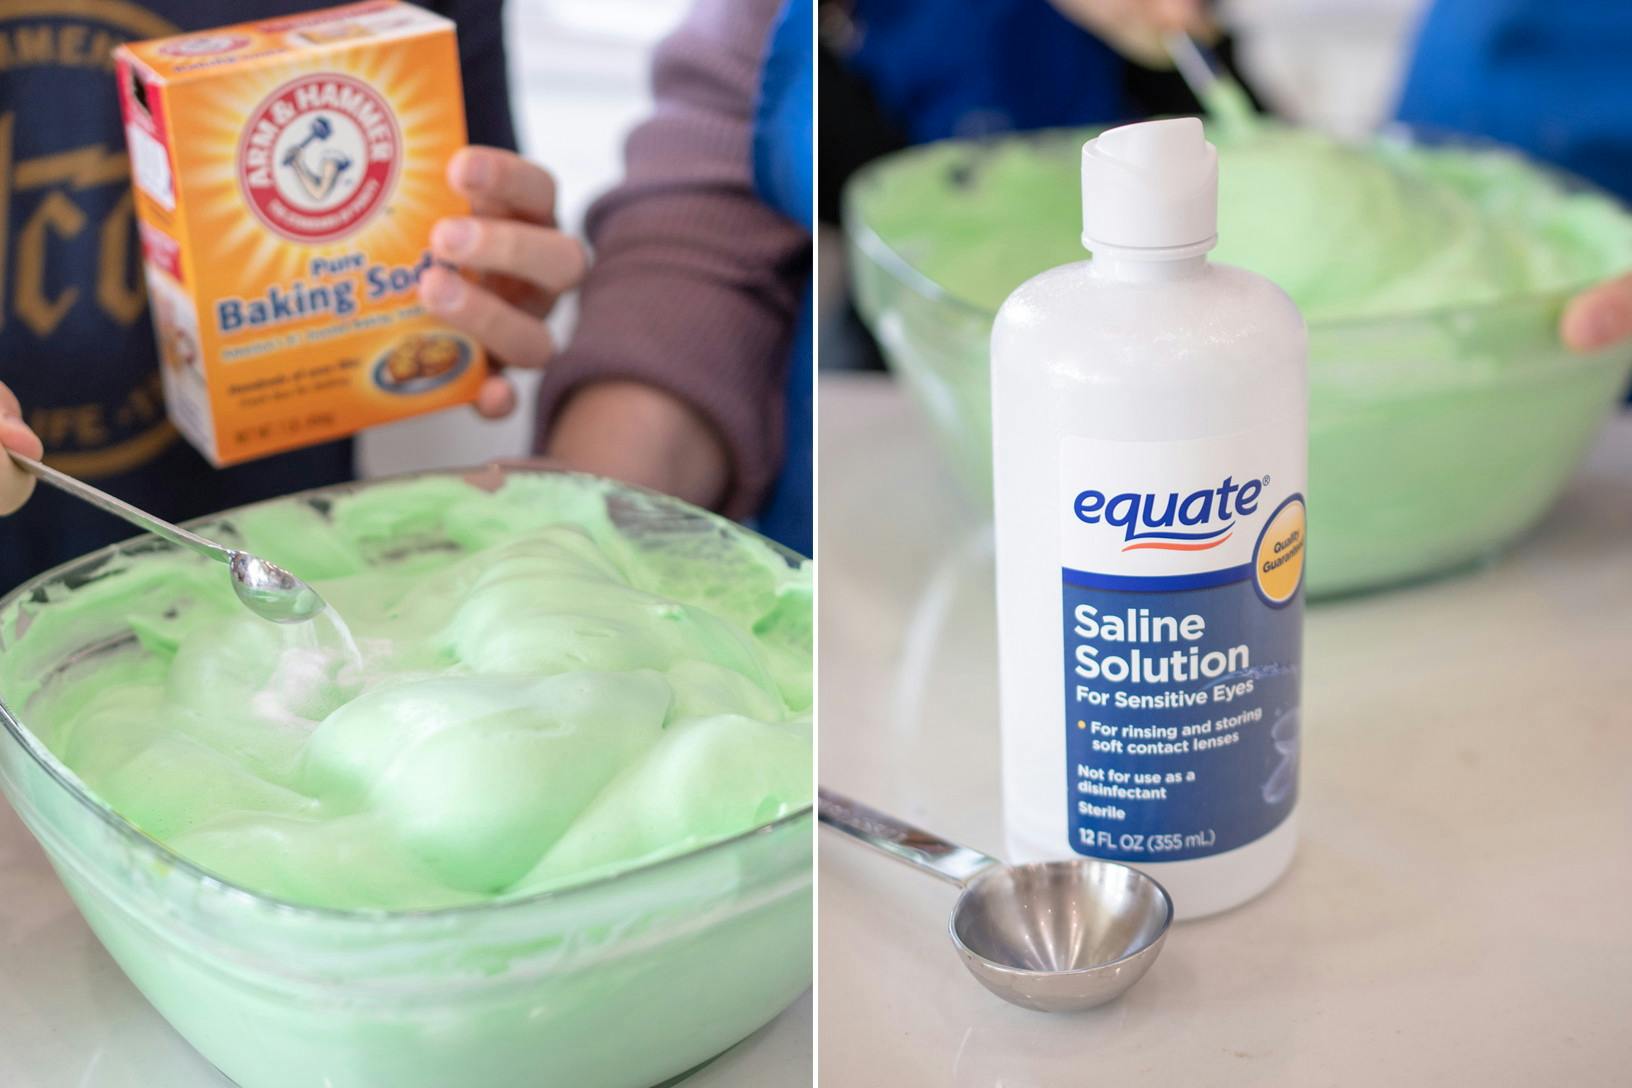 Two photos side-by-side; a person adding baking soda to a green slime mixture. A bottle of equate saline solution next to the bowl of green slime.